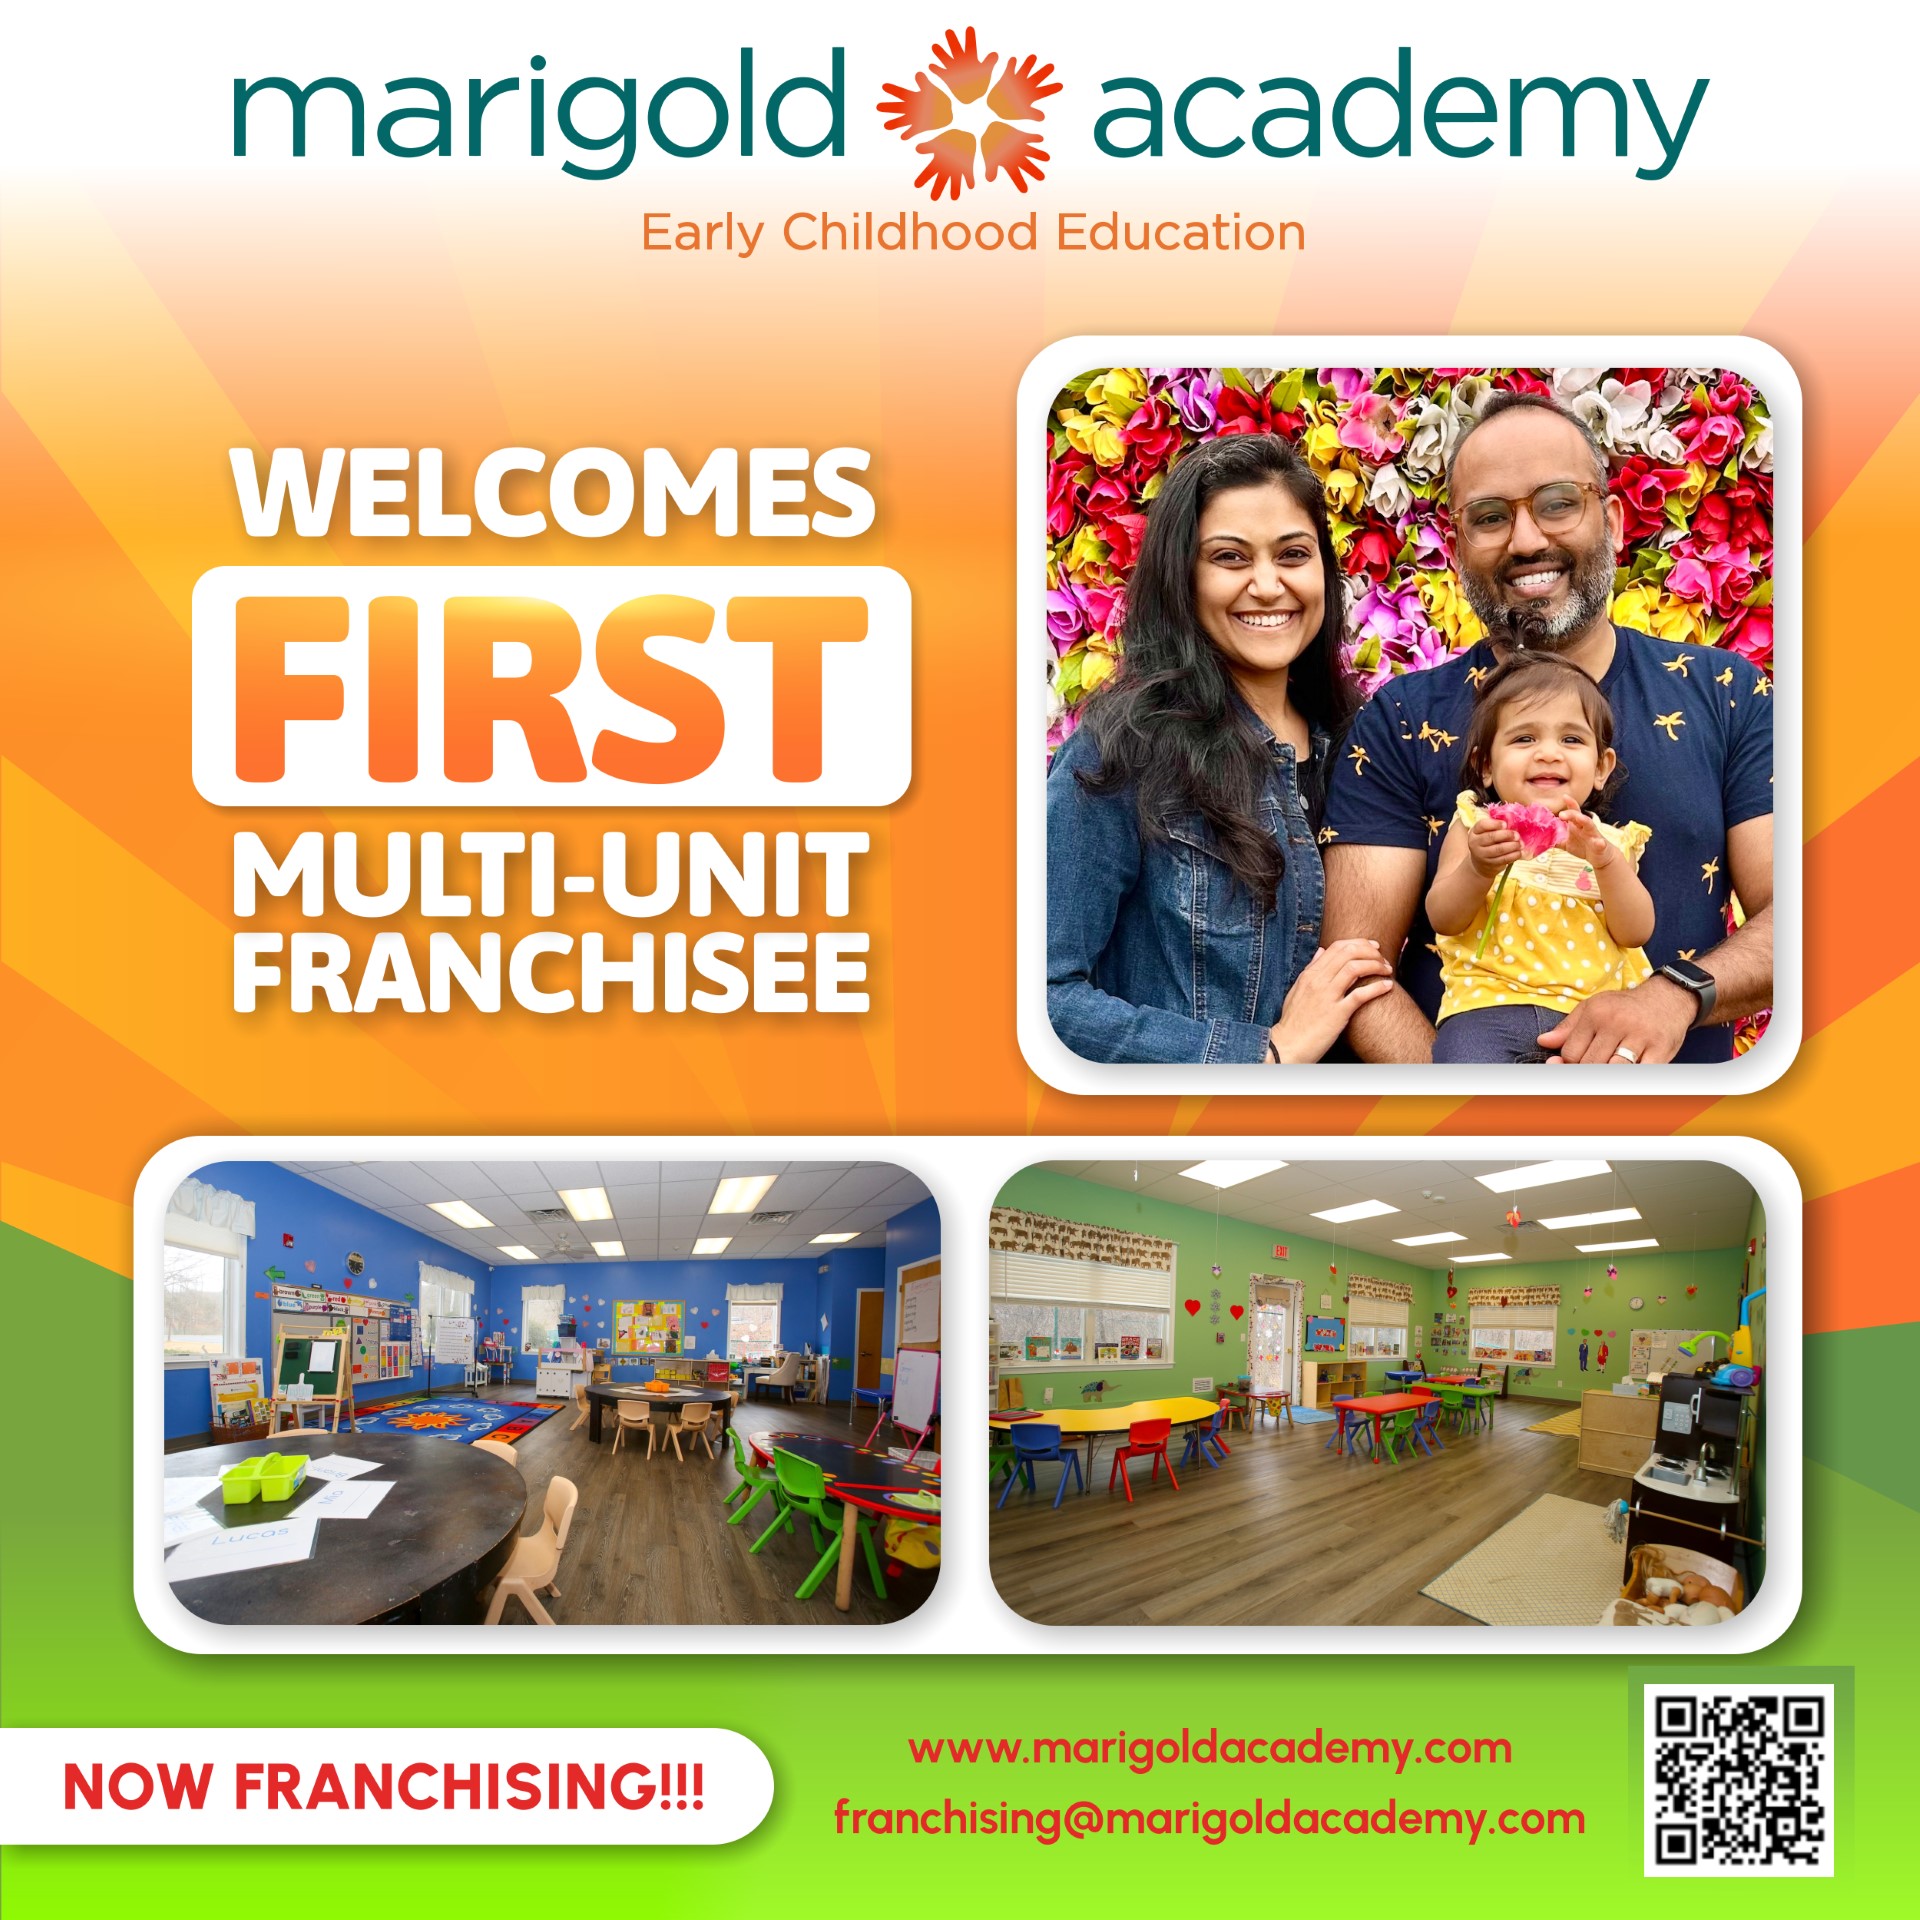 MARIGOLD ACADEMY WELCOMES FIRST MULTI-UNIT FRANCHISEE!!